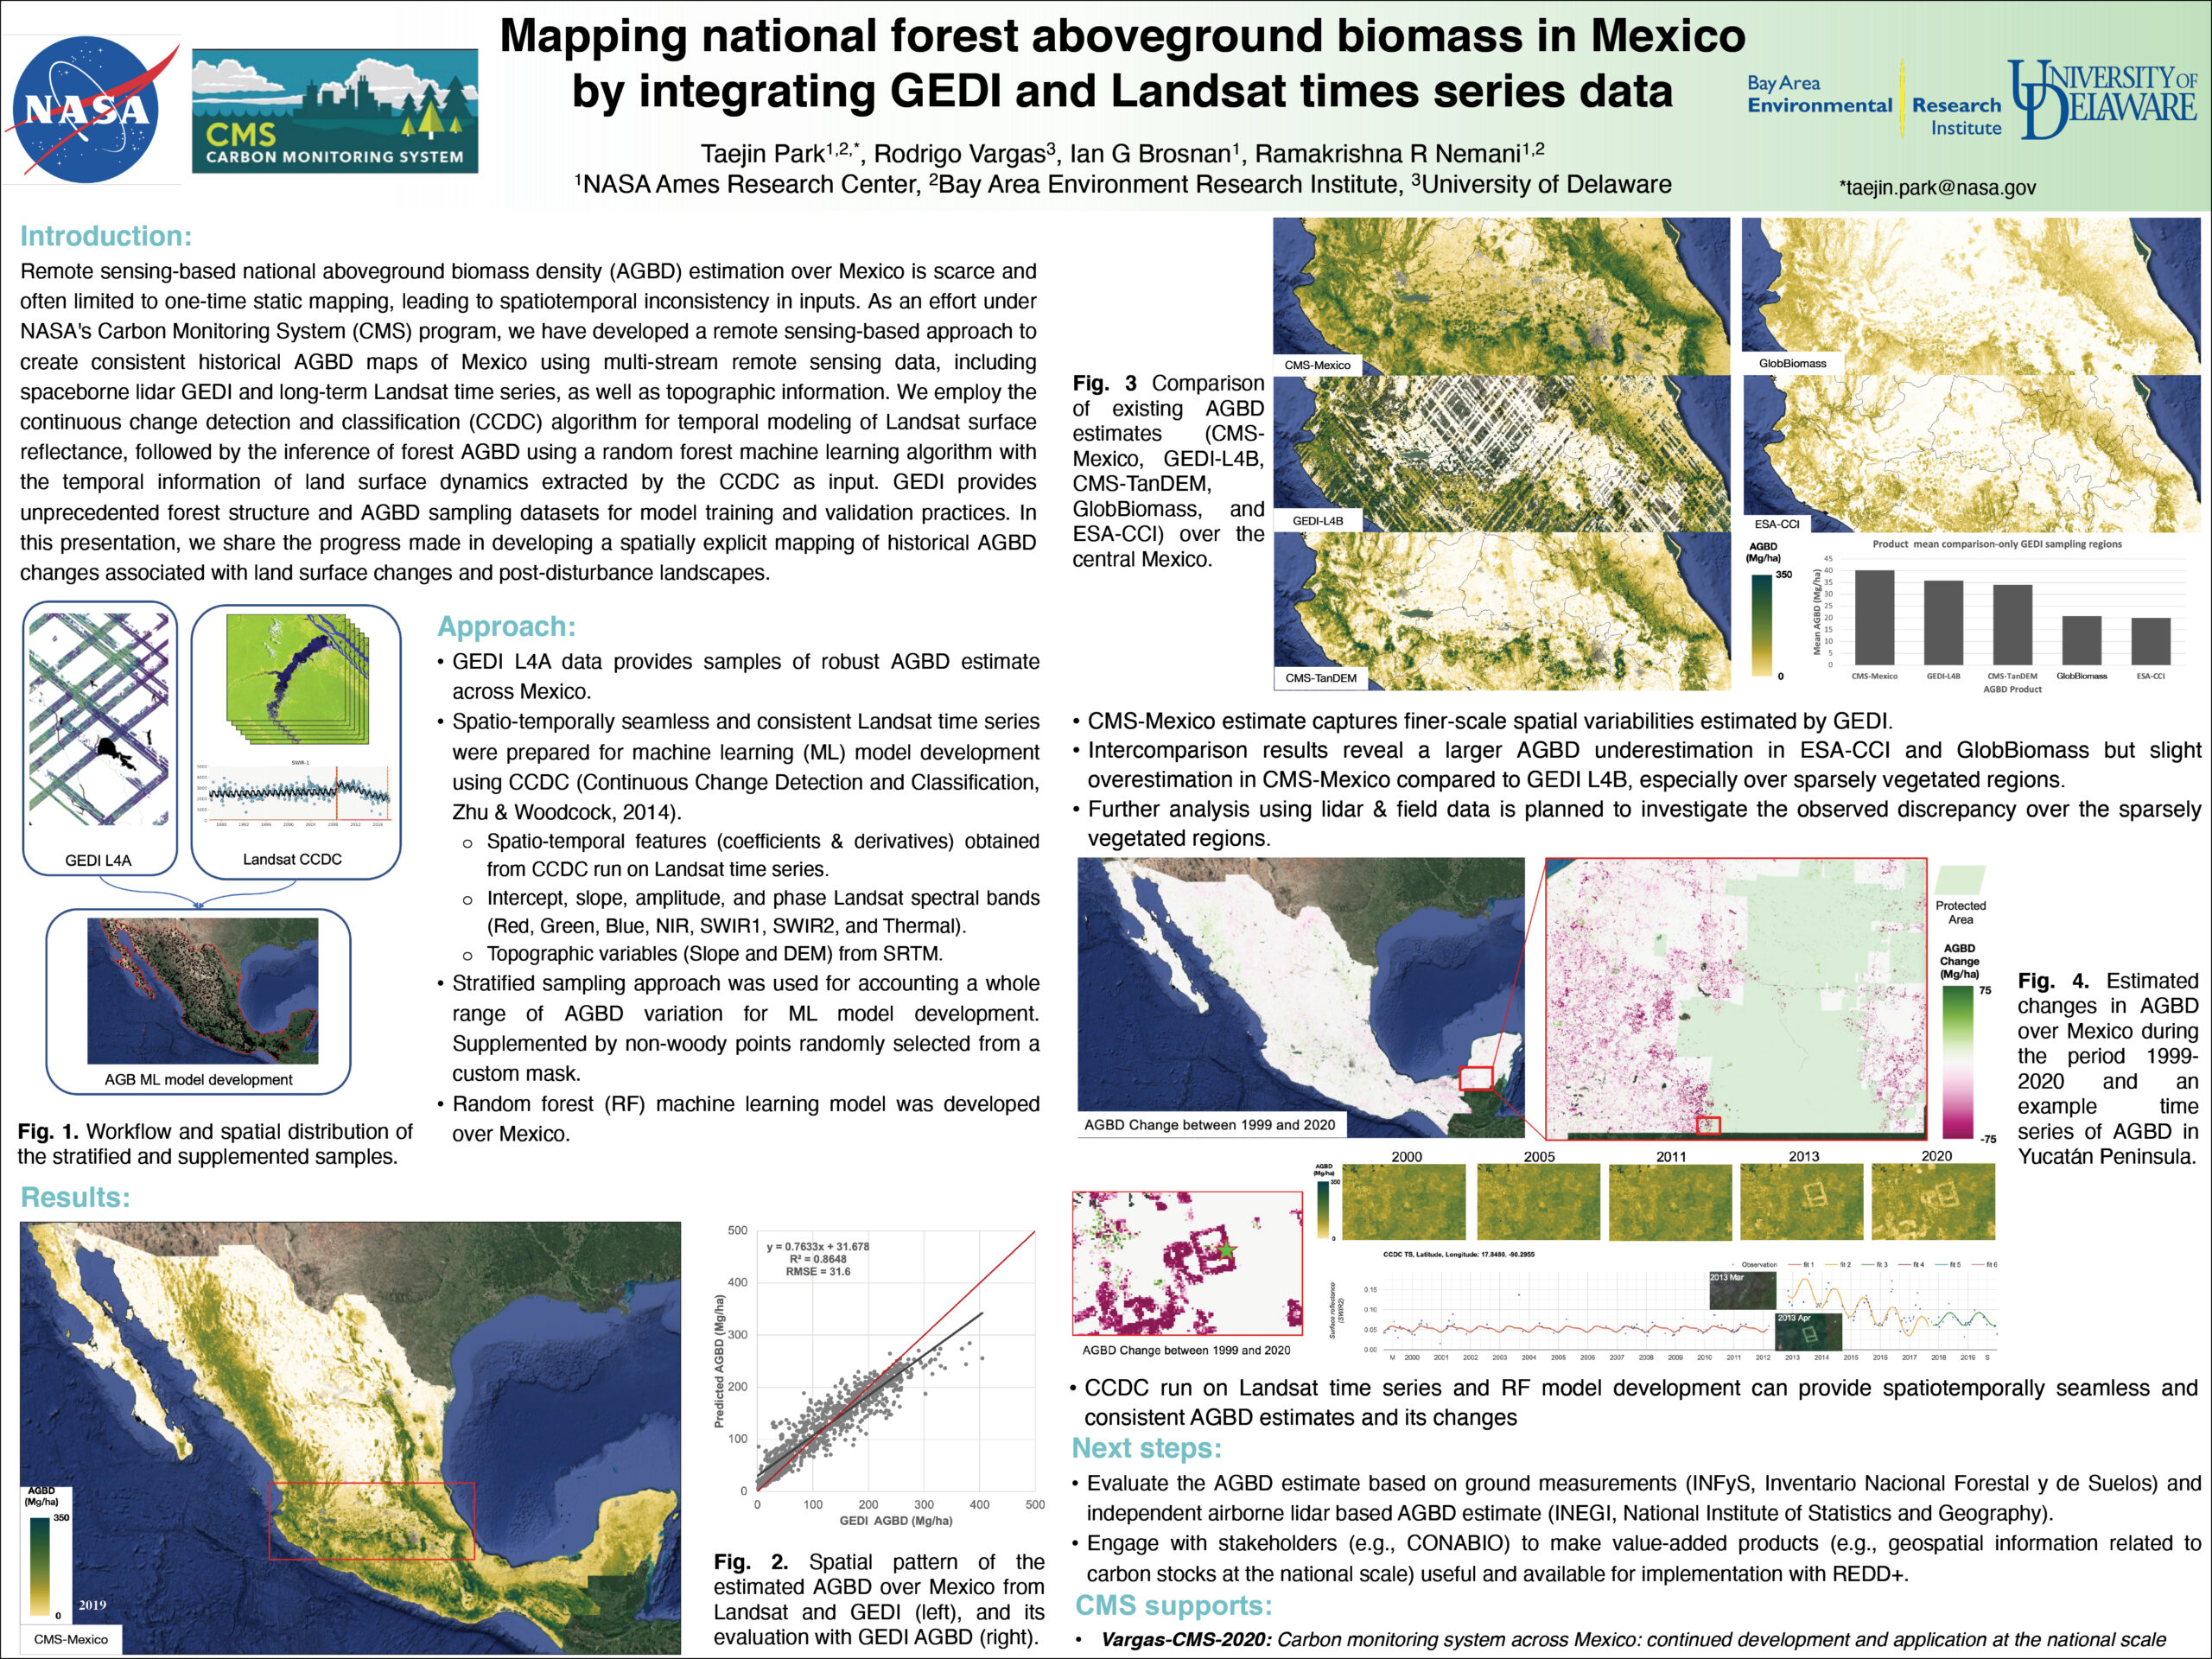 AGU23 Poster by Taejin Park titled Mapping national forest aboveground biomass in Mexico by integrating GEDI and Landsat time series data